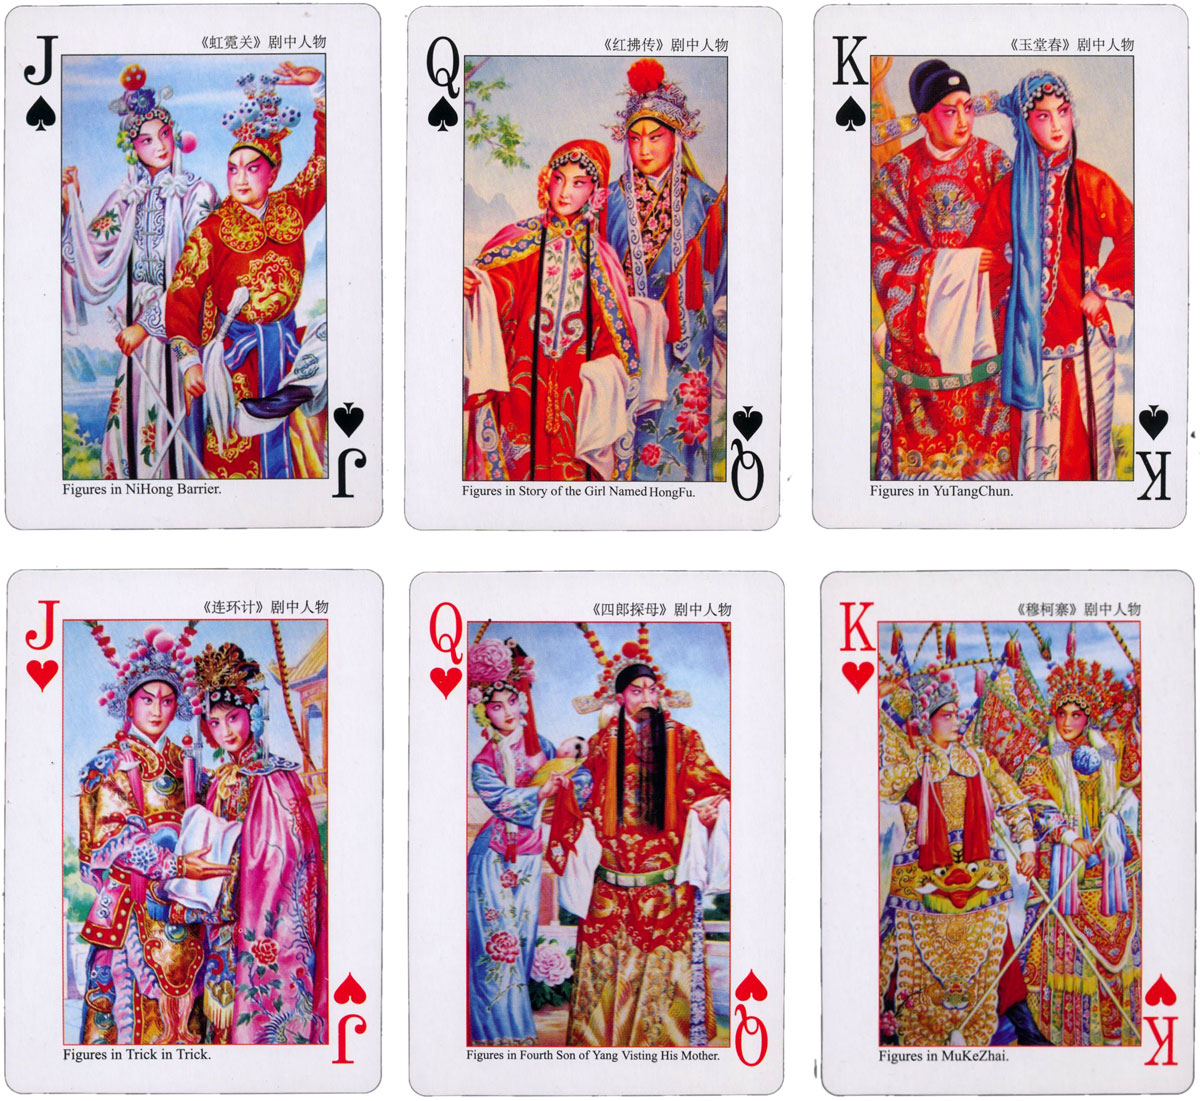 Court cards from “Chinese Roles of Beijing Opera” playing cards published by HCG Poker Productions, 2005